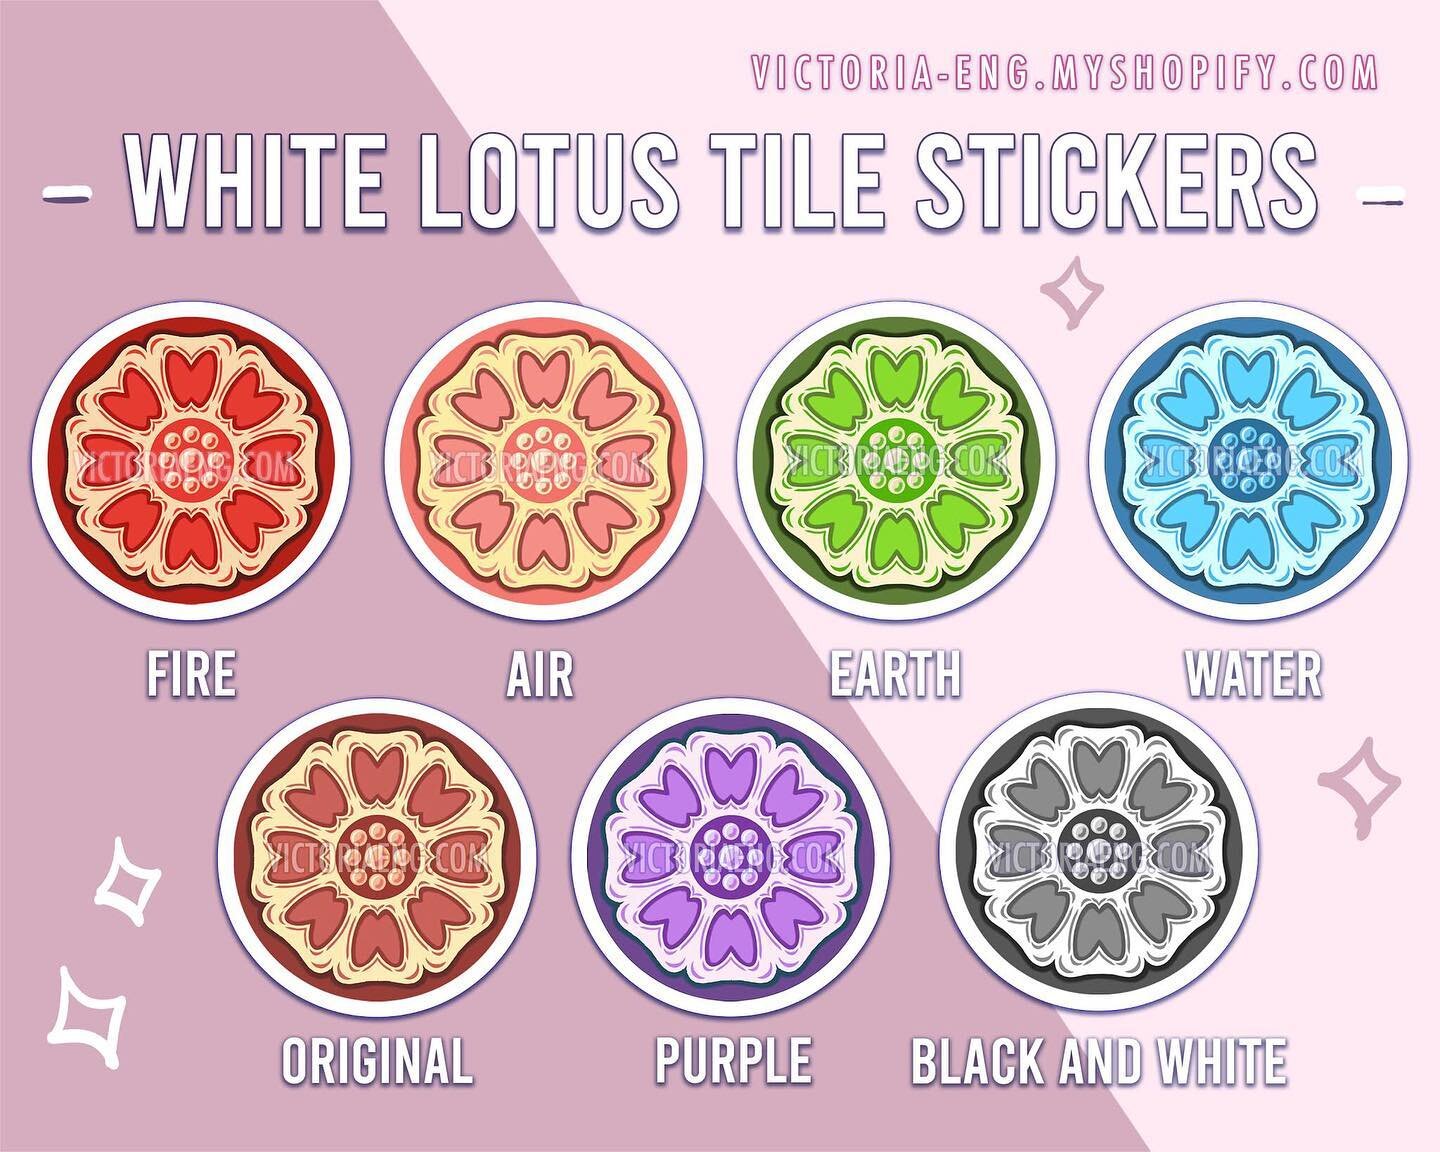 My new White Lotus Tile stickers are here 🌸✨ 
Swipe for some closeup detail! Top row features the Lotus Tiles in the 4 nation&rsquo;s colors, and bottom row has the original coloring along with a purple and black and white. They&rsquo;re scratch pro